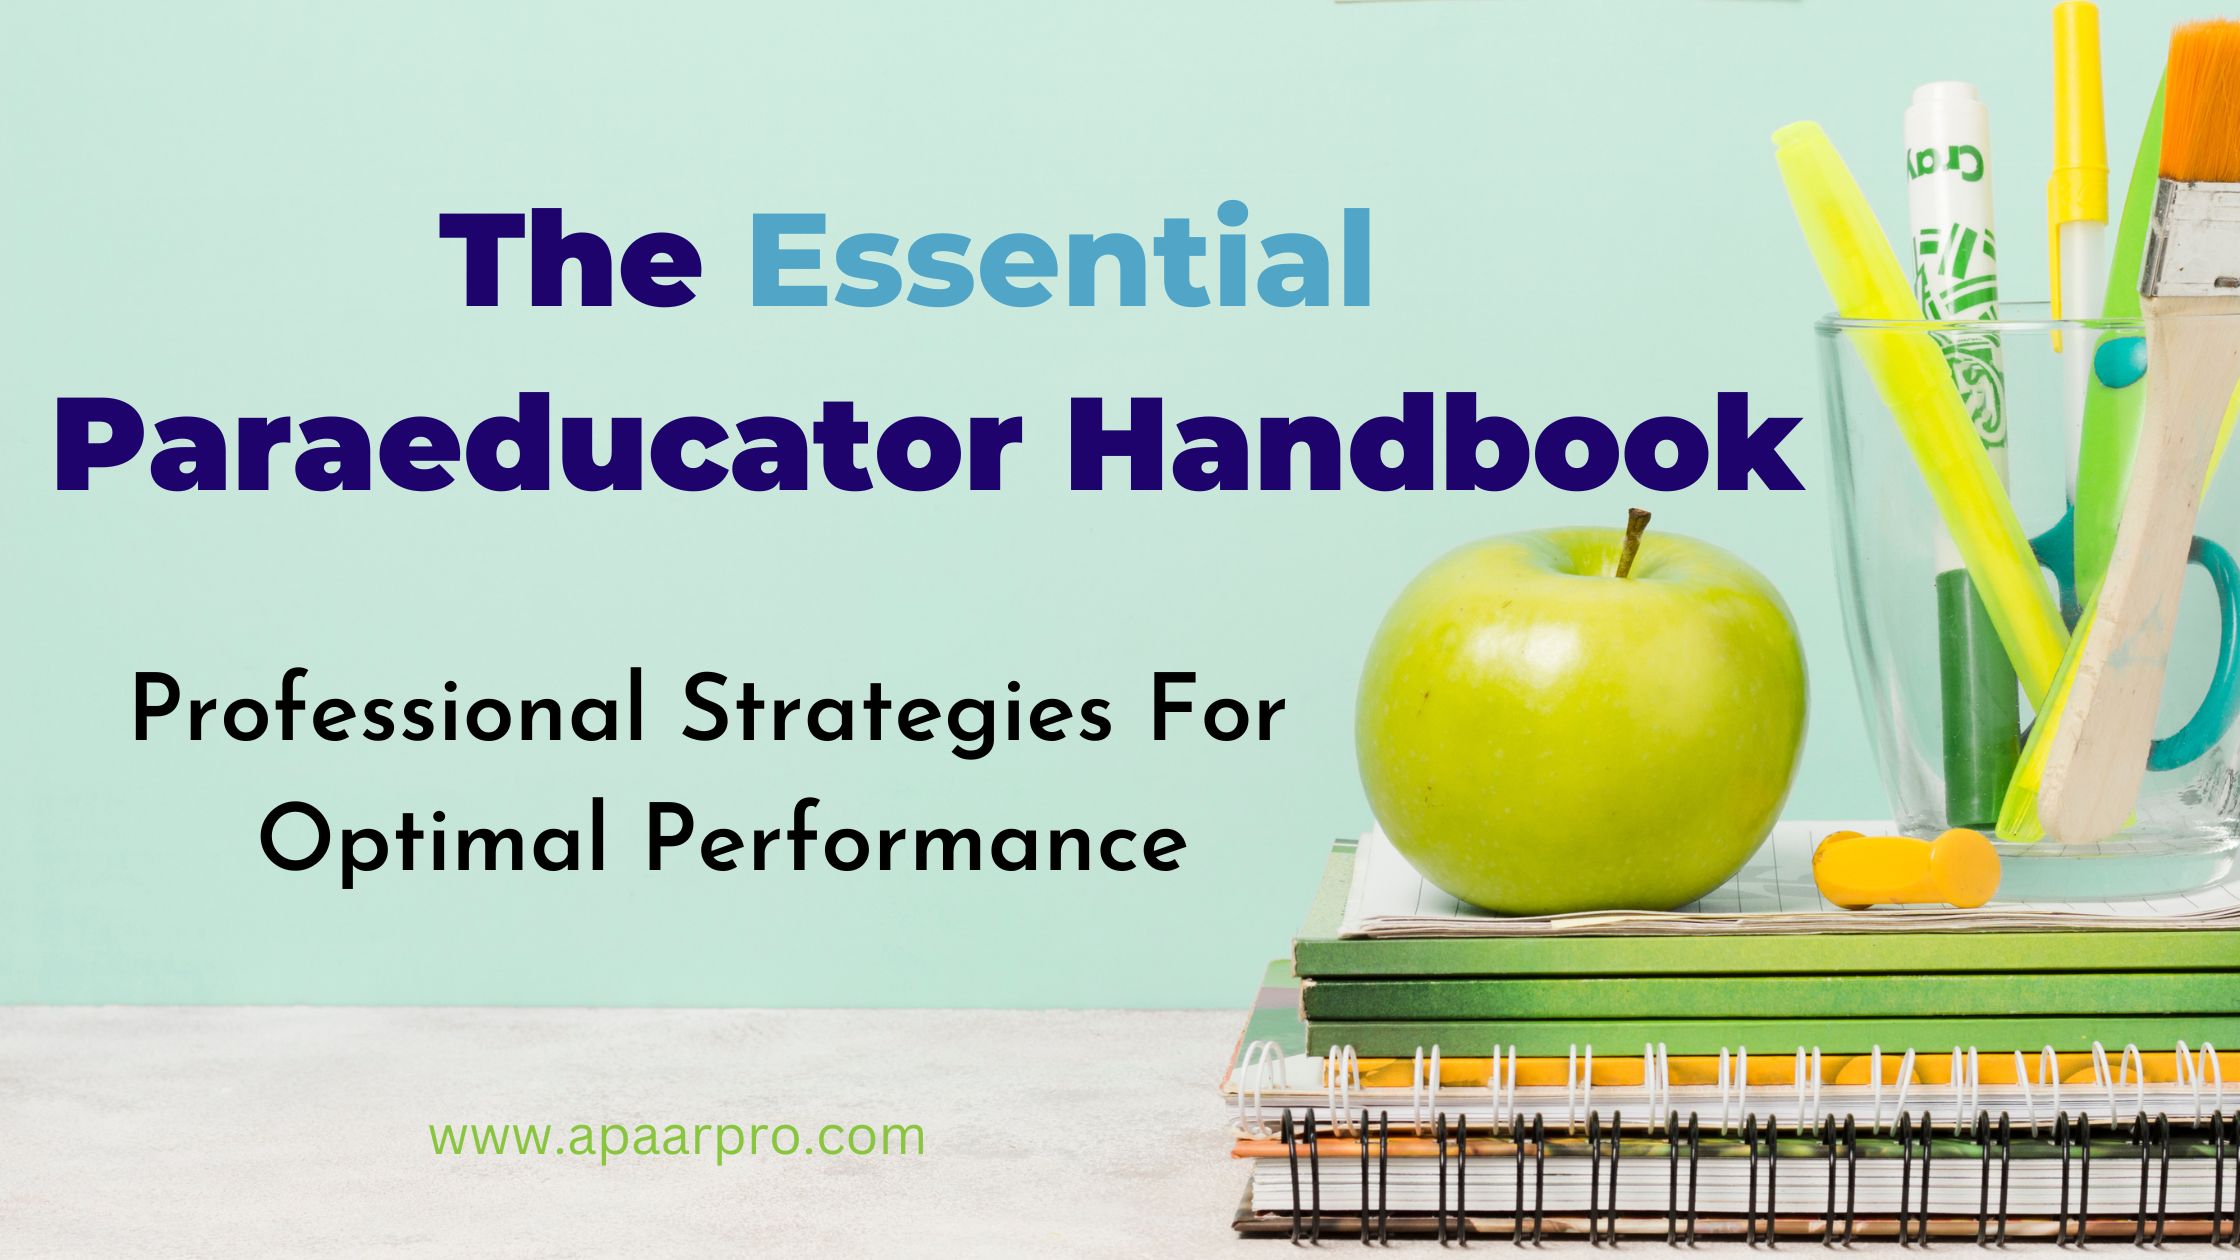 Paraeducator Handbook for Optimal Performance by A Para Pro for new paraeducator paraprofessionals